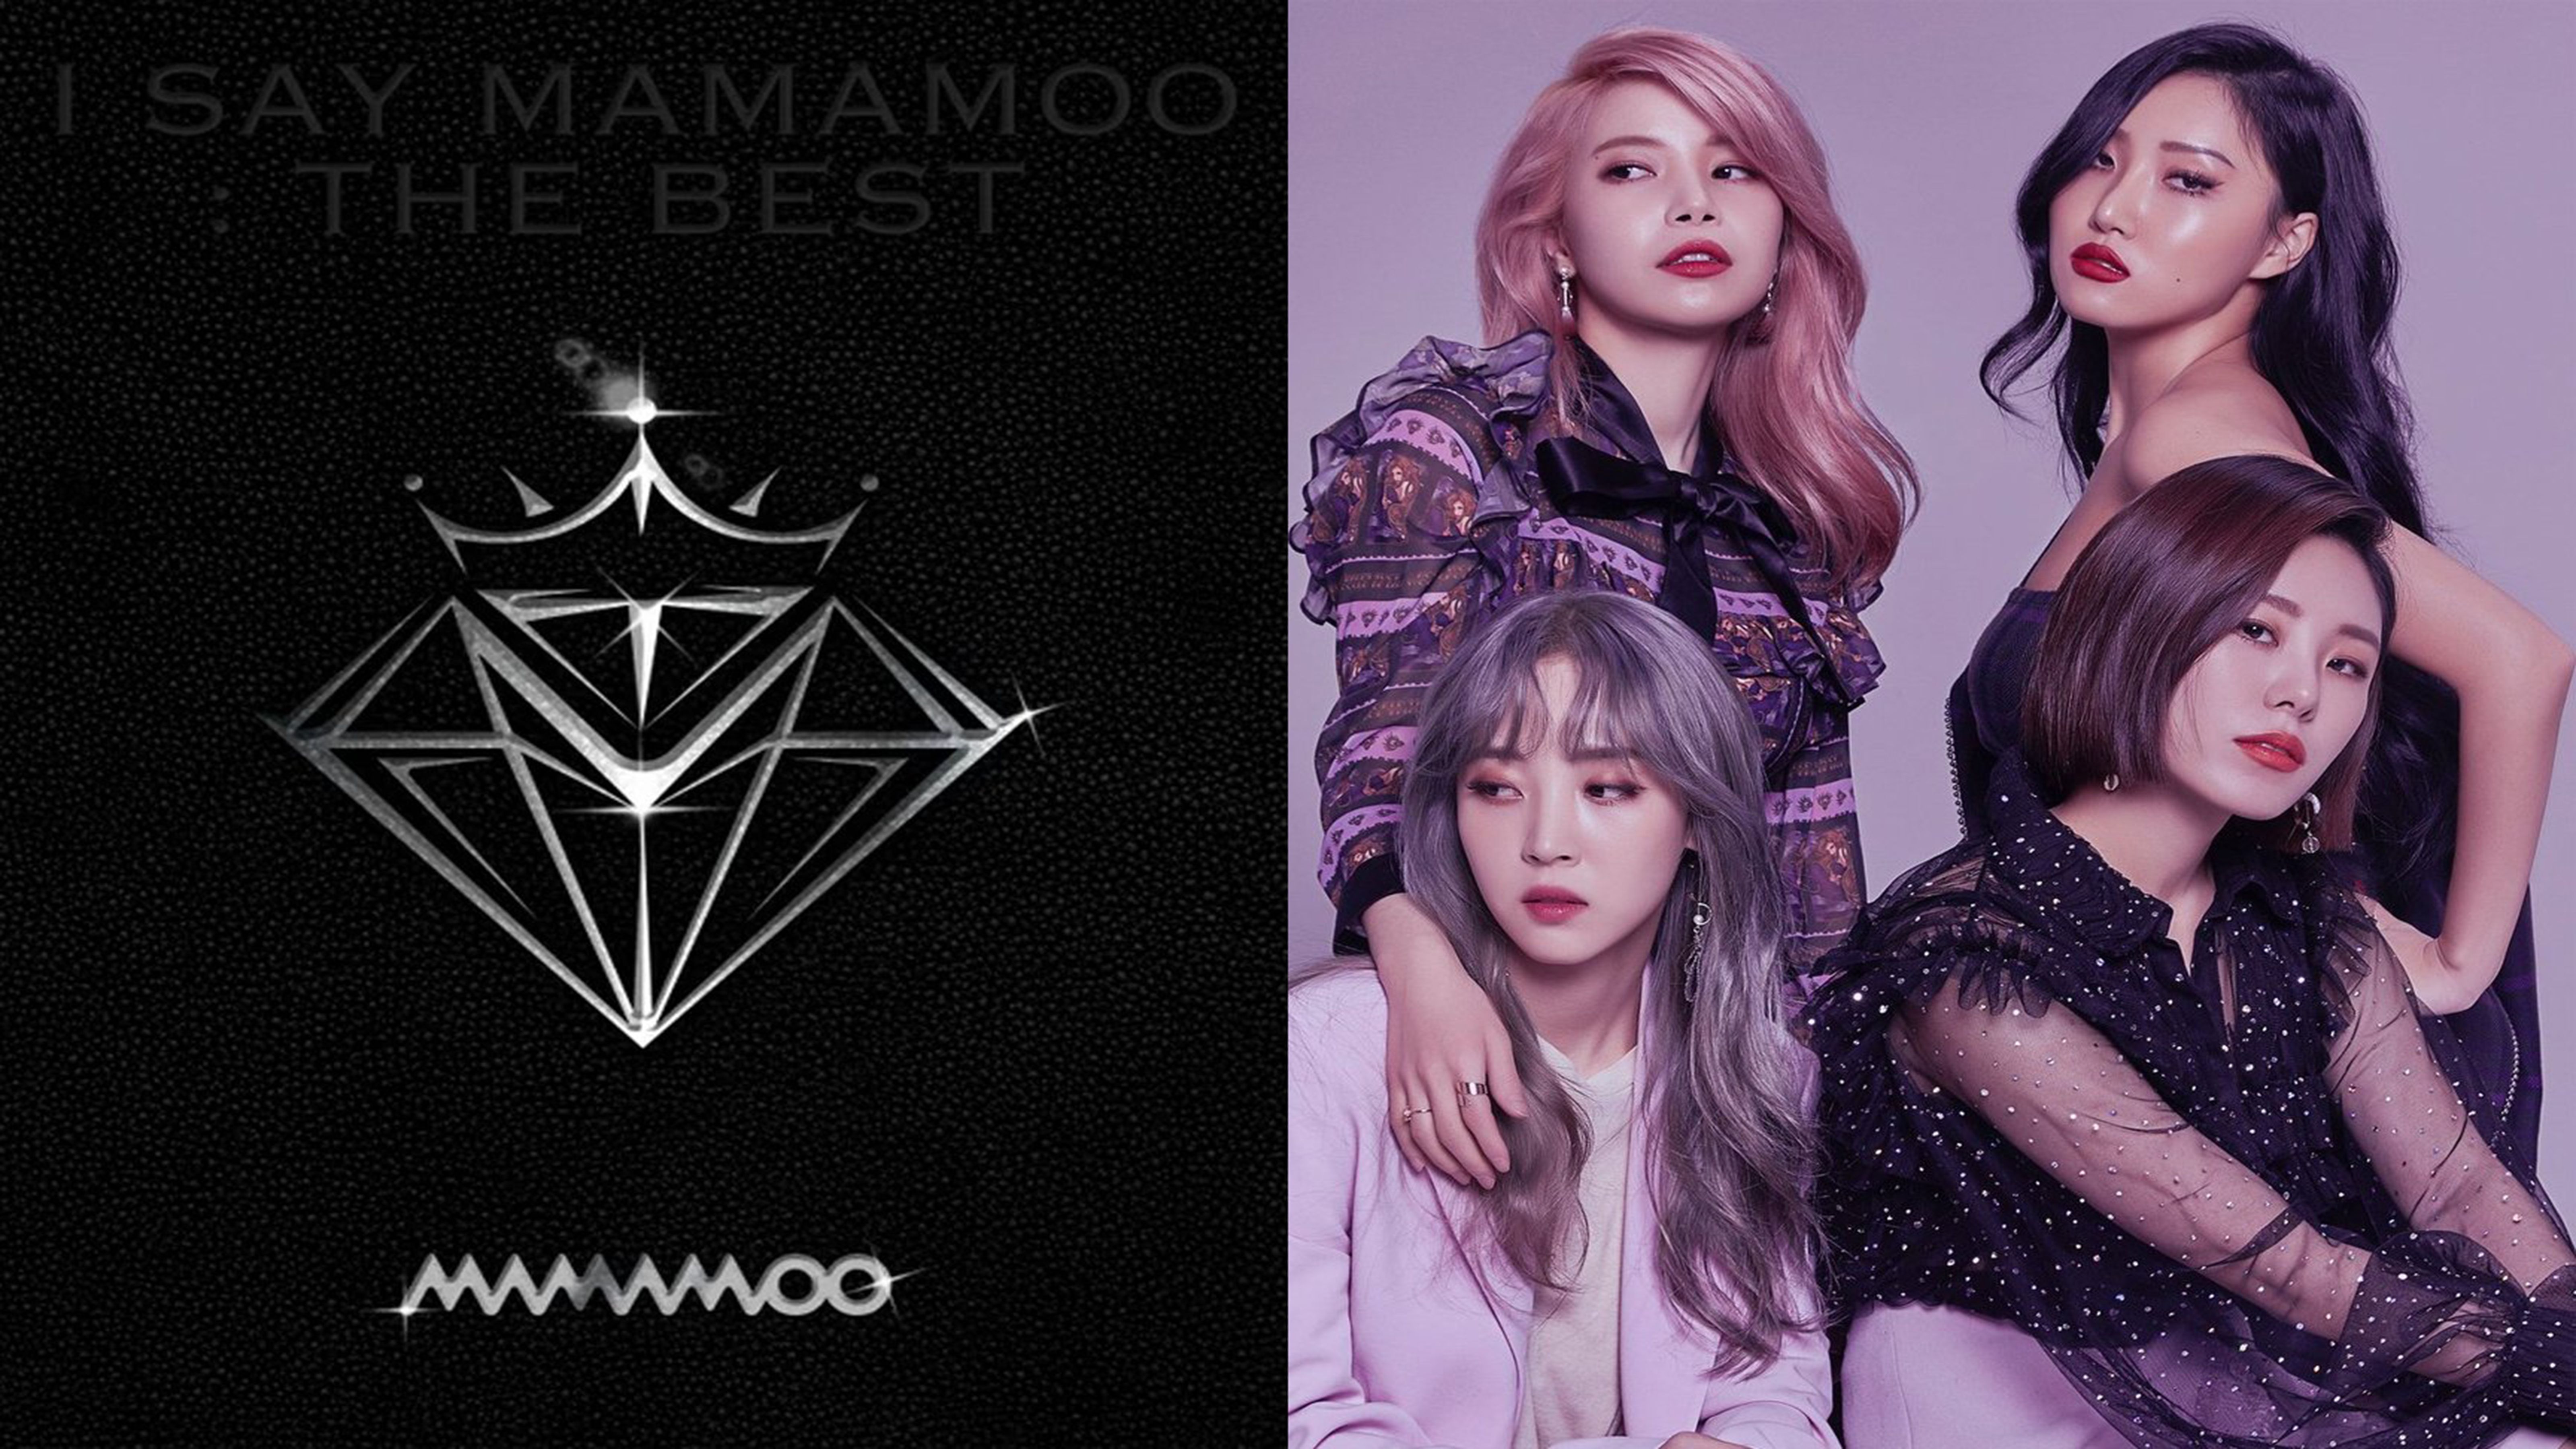 MAMAMOO releases compilation album ‘I SAY MAMAMOO THE BEST’ photo from AllKpop